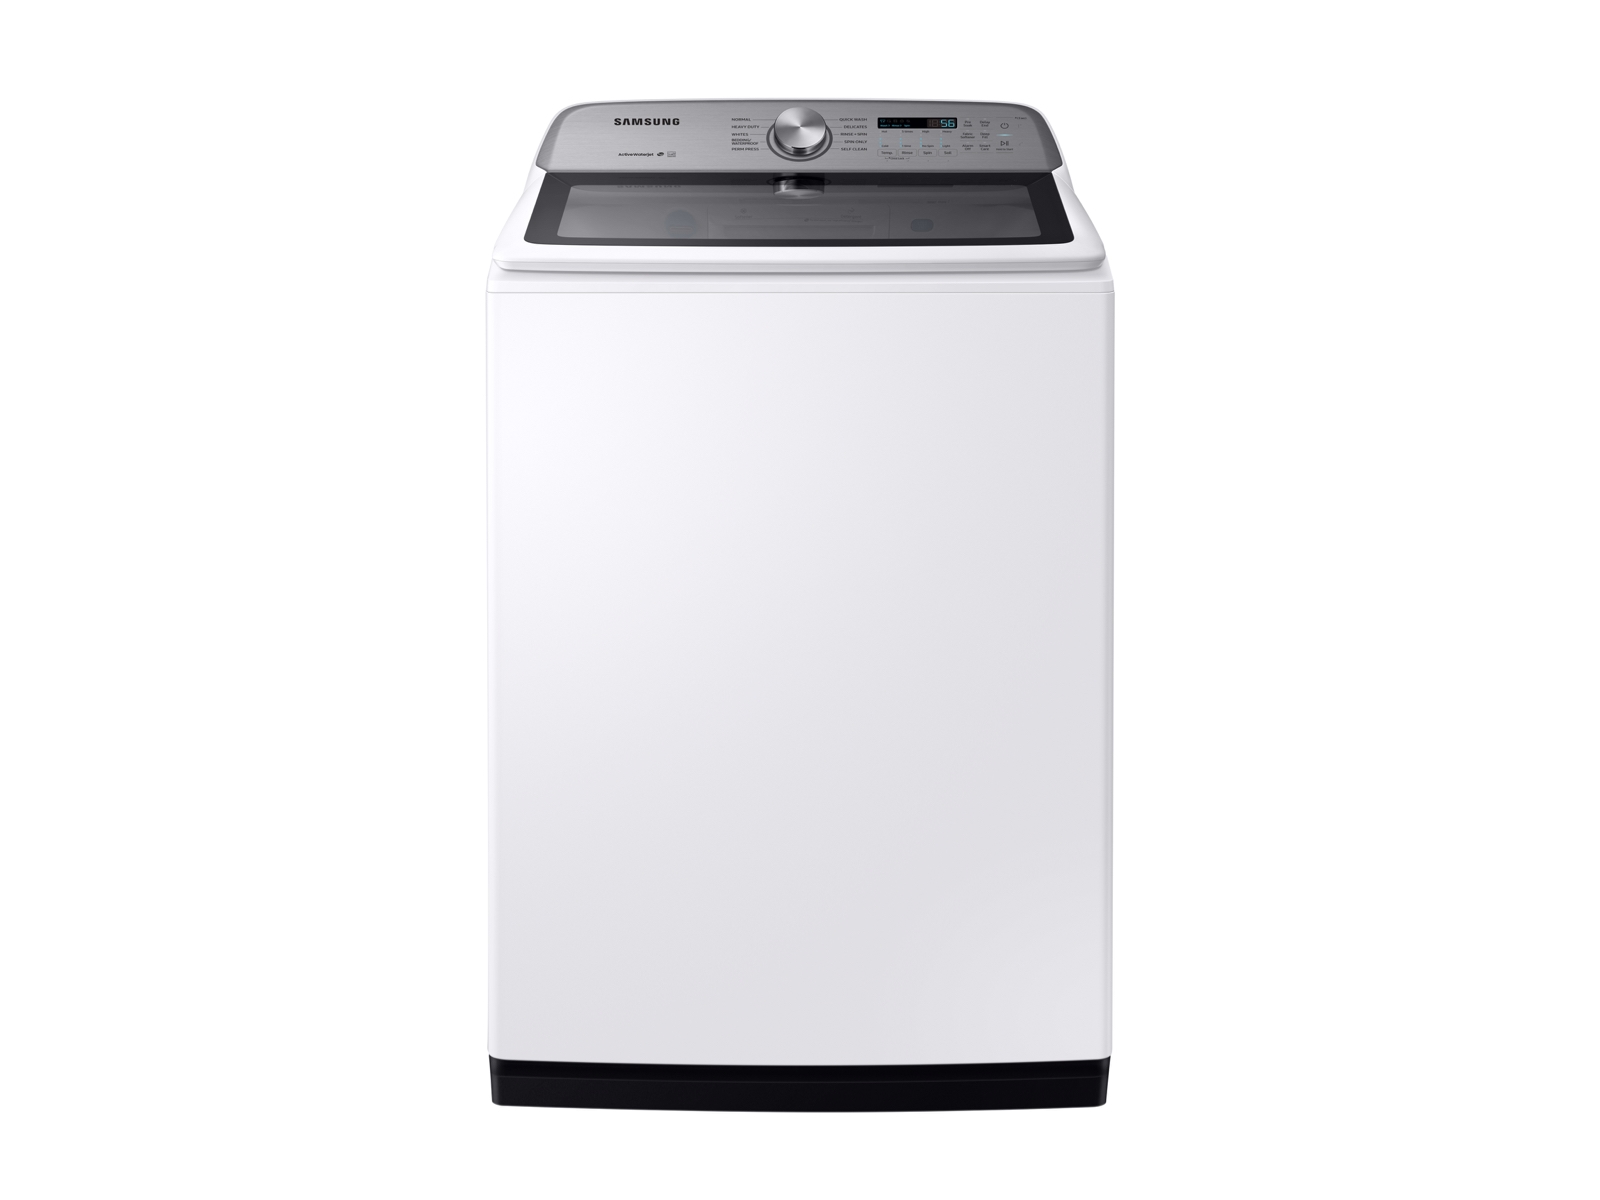 Photos - Washing Machine Samsung 5.4 cu. ft. Top Load Washer with Active WaterJet in White(WA54R720 